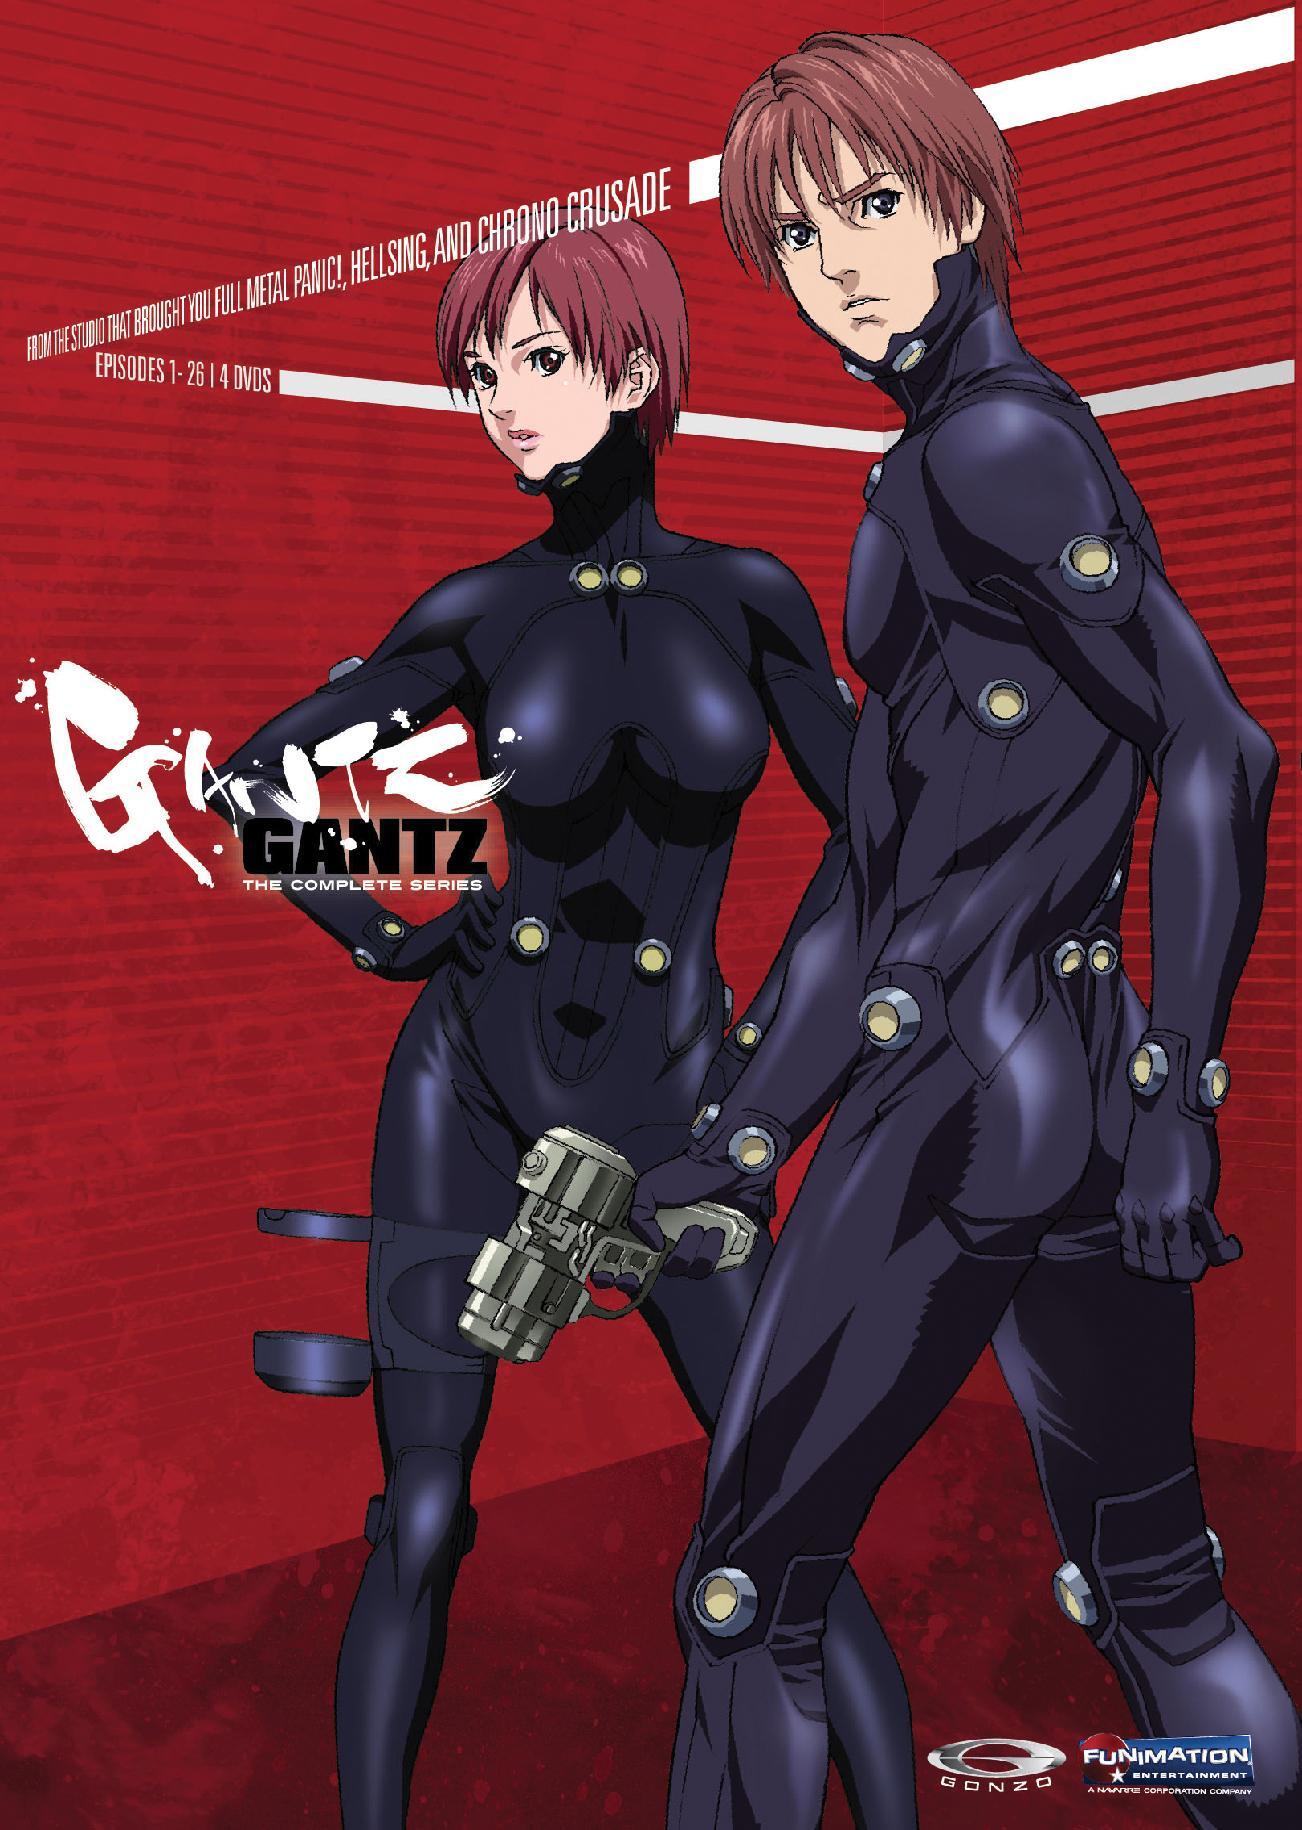 Gantz: The Complete Series (DVD Boxed Set) - DVD [ 2004 ]  - Anime Television On DVD - TV Shows On GRUV